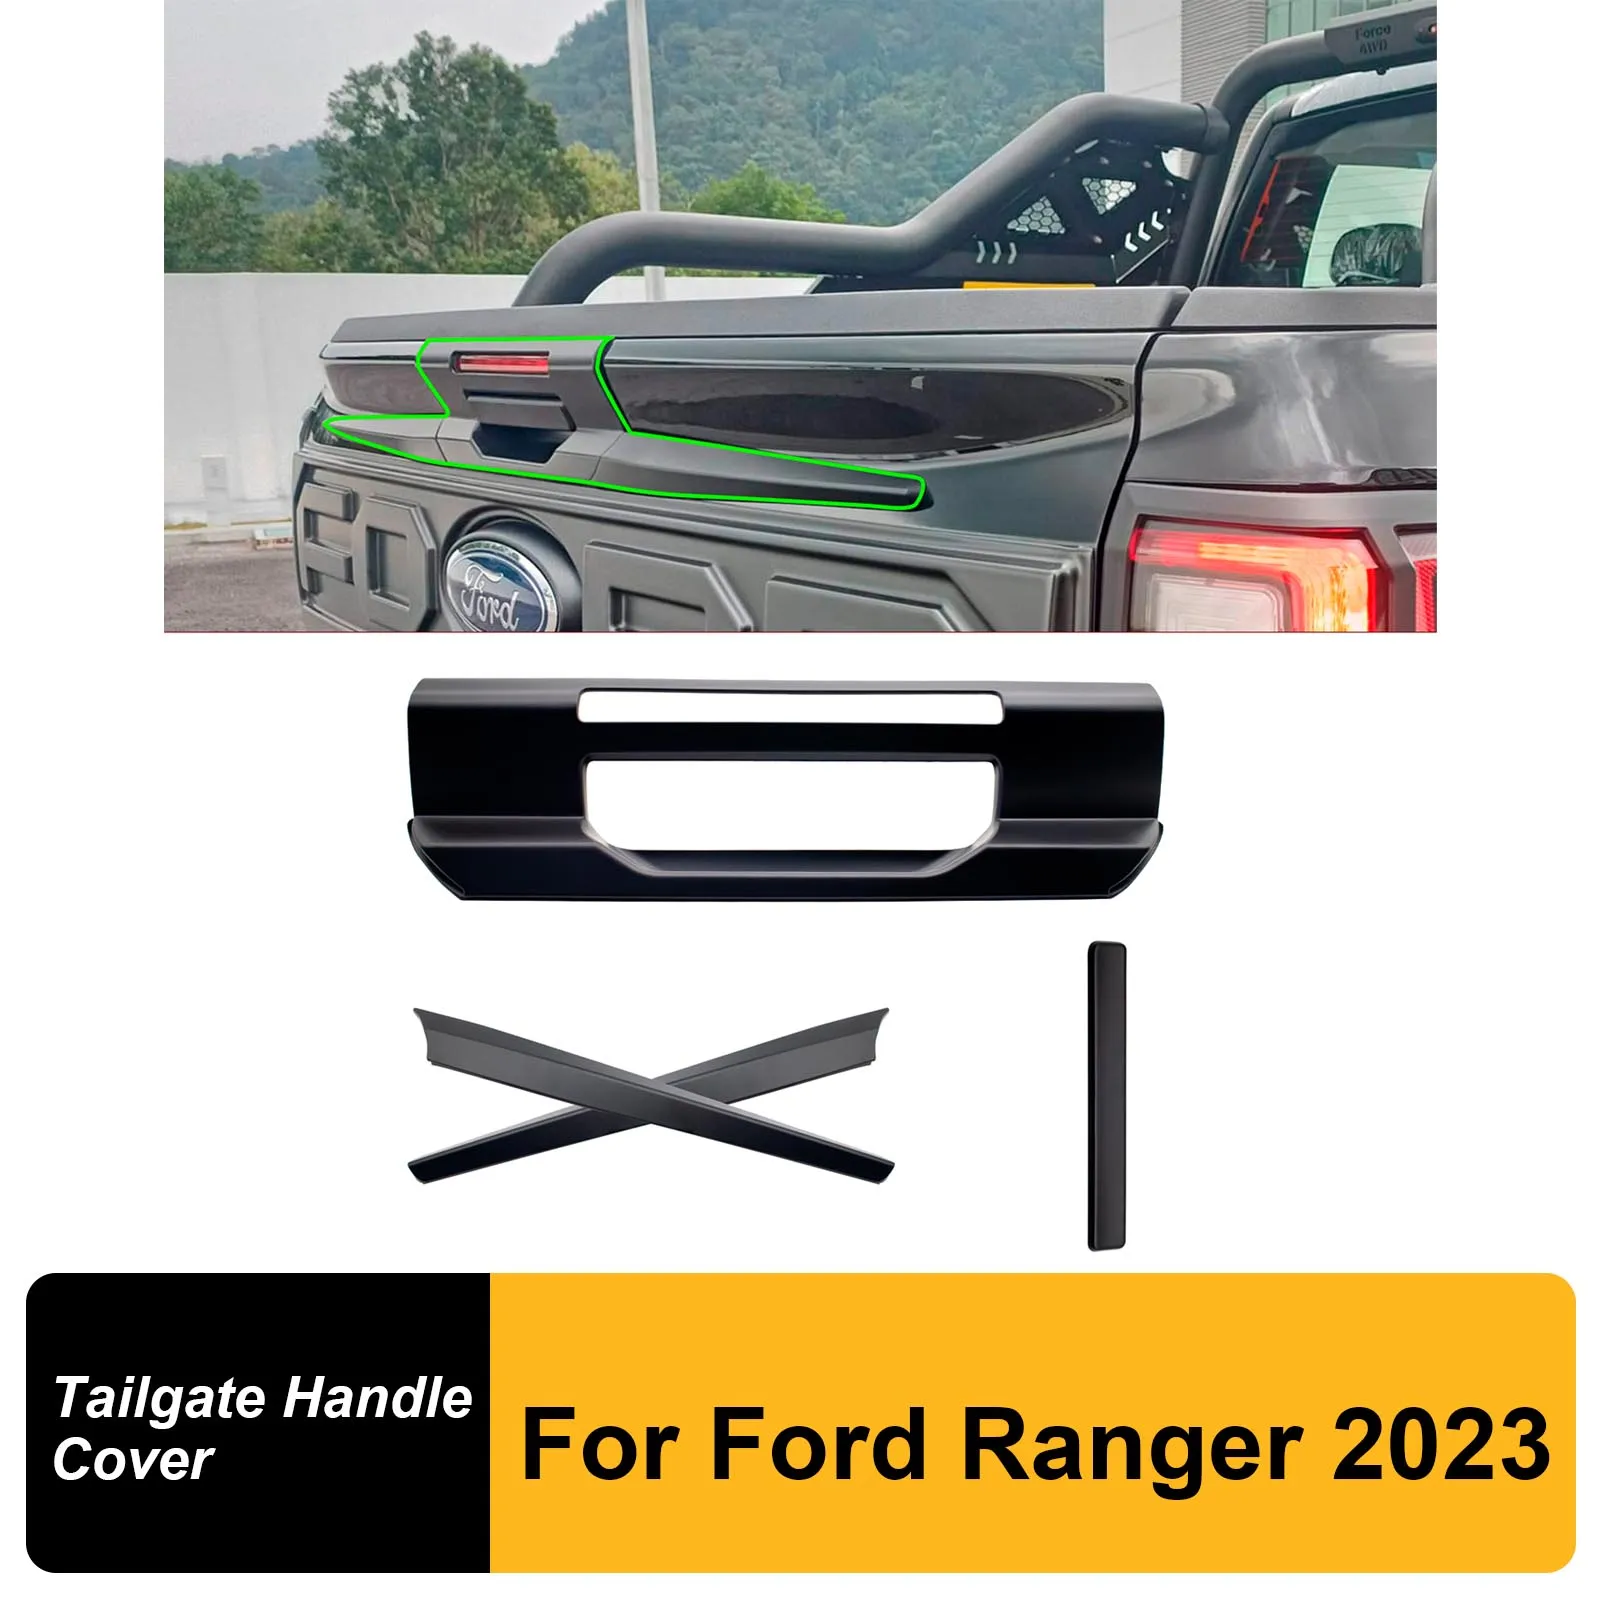 

Tailgate Handle Cover For Ford Ranger T9 2022 2023 XLT XLS XL Rear Handle Trim Guard Without keyhole Next Generation Accessories